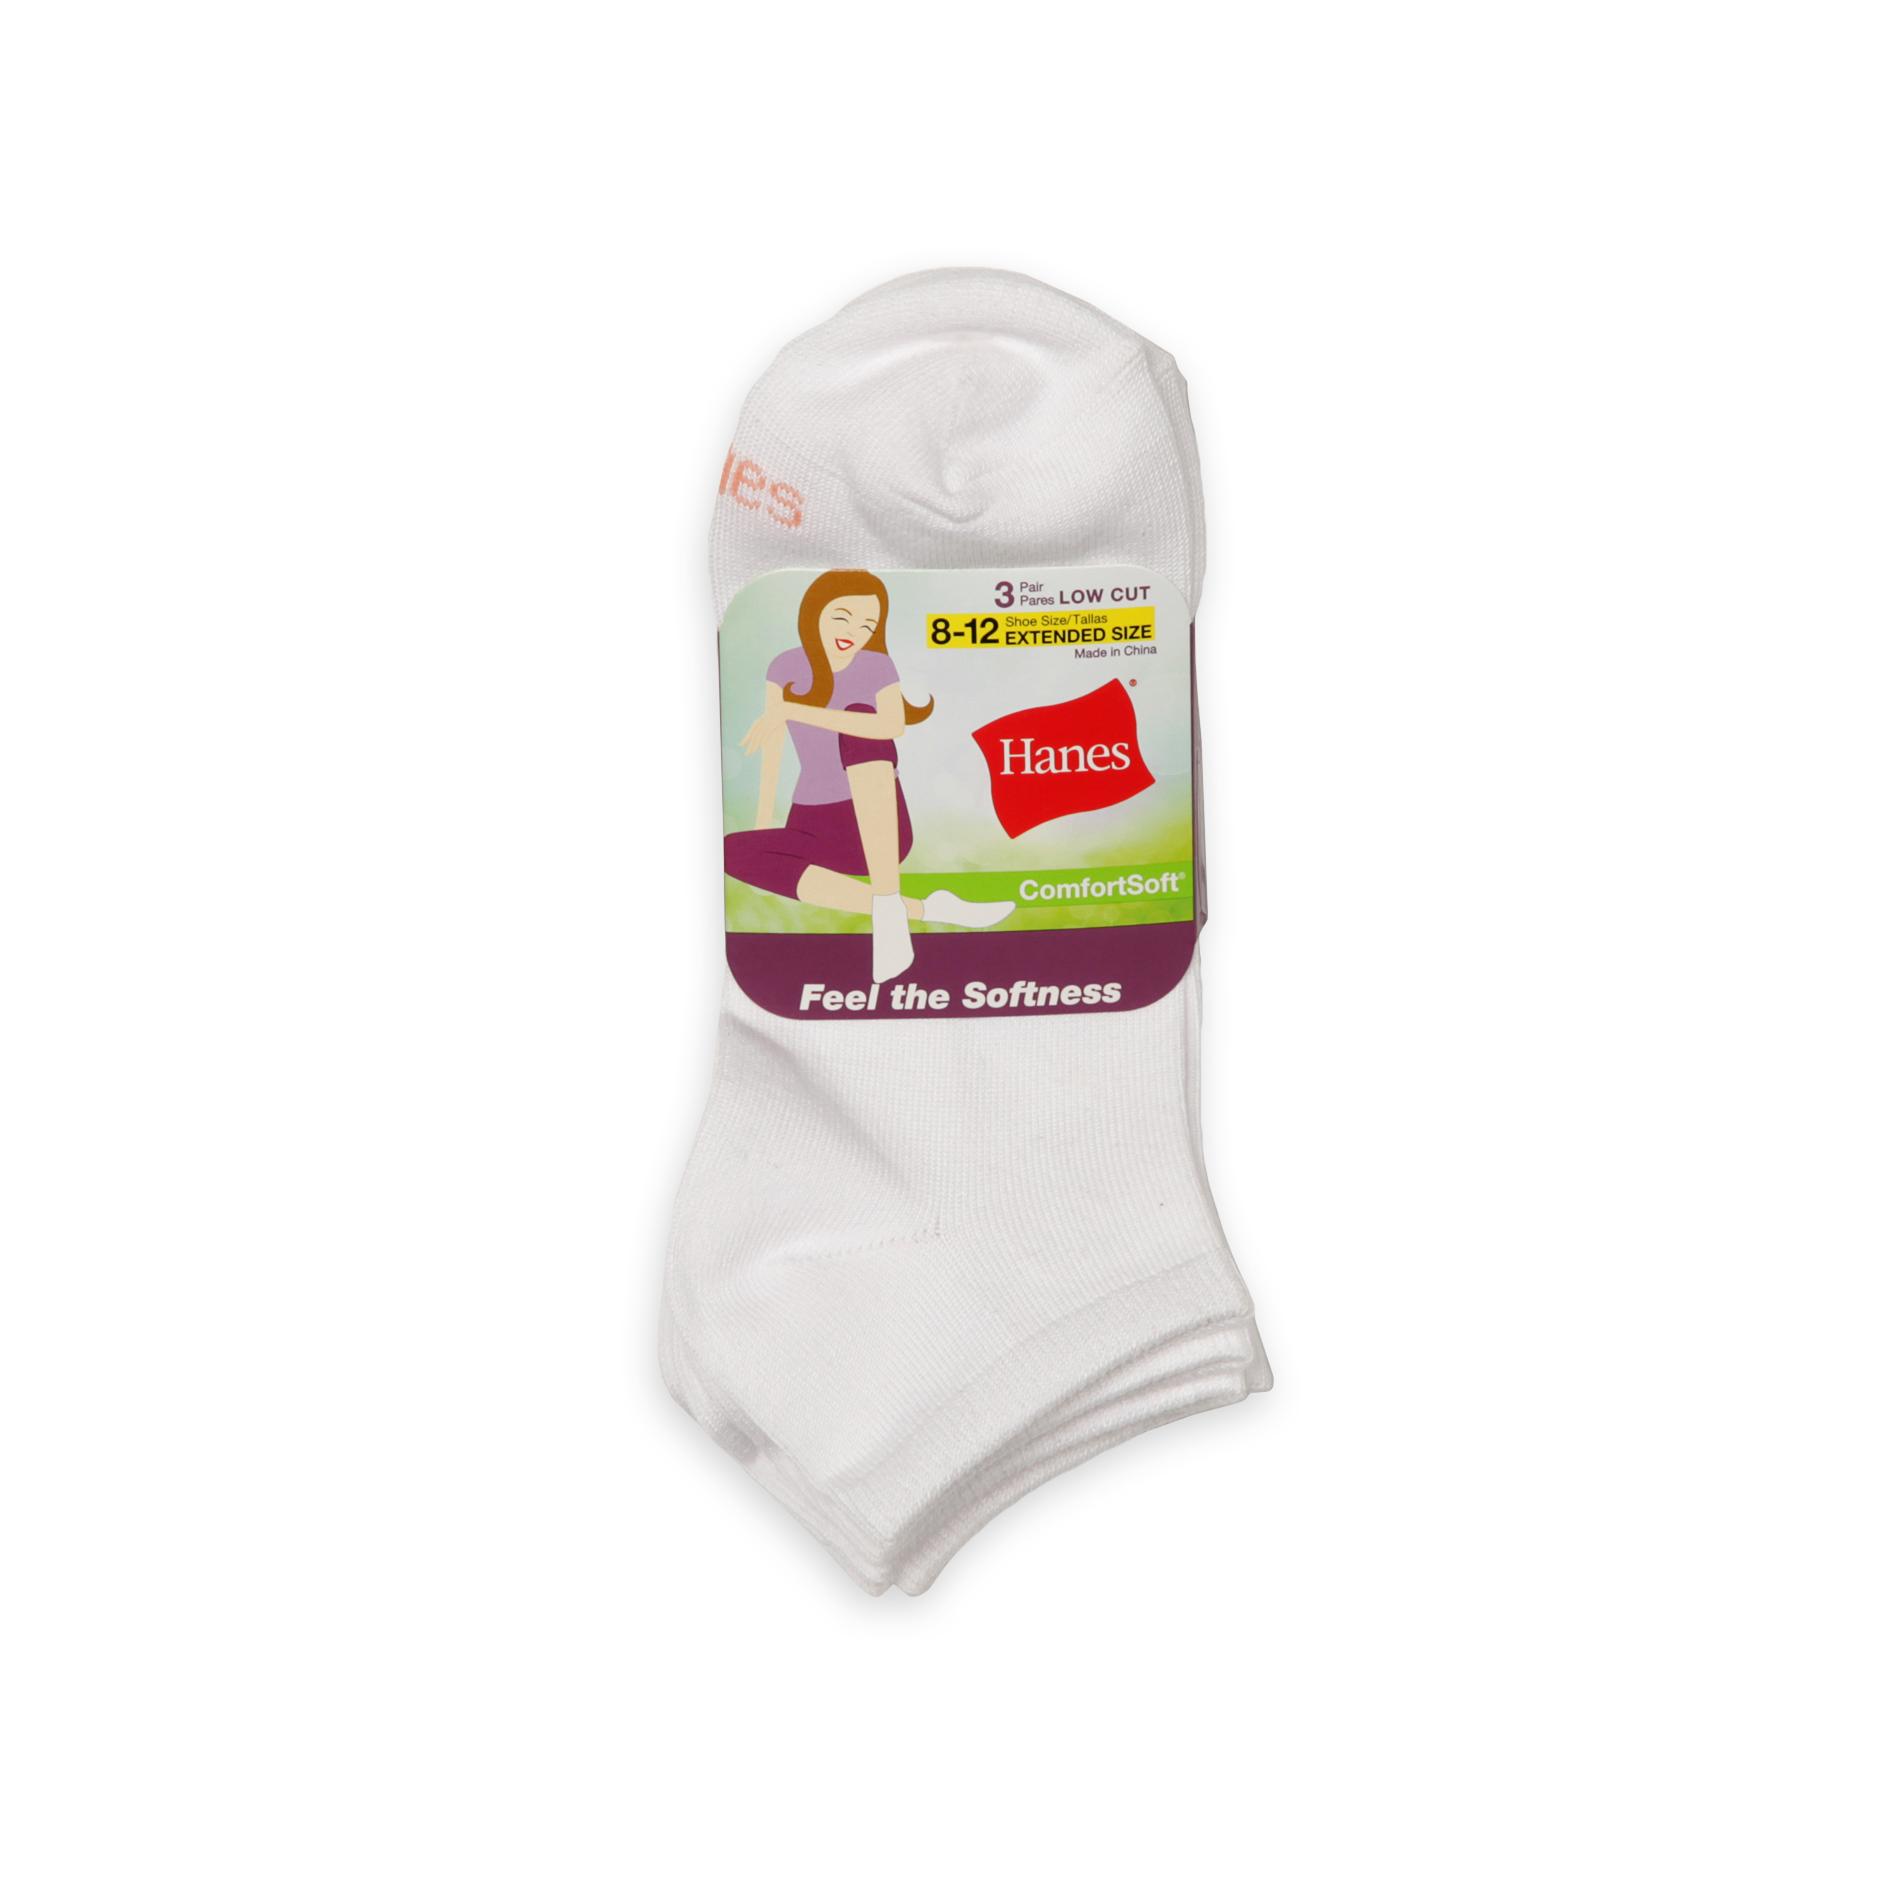 Hanes Women's 3 Pairs Low-Cut Socks - Extended Size